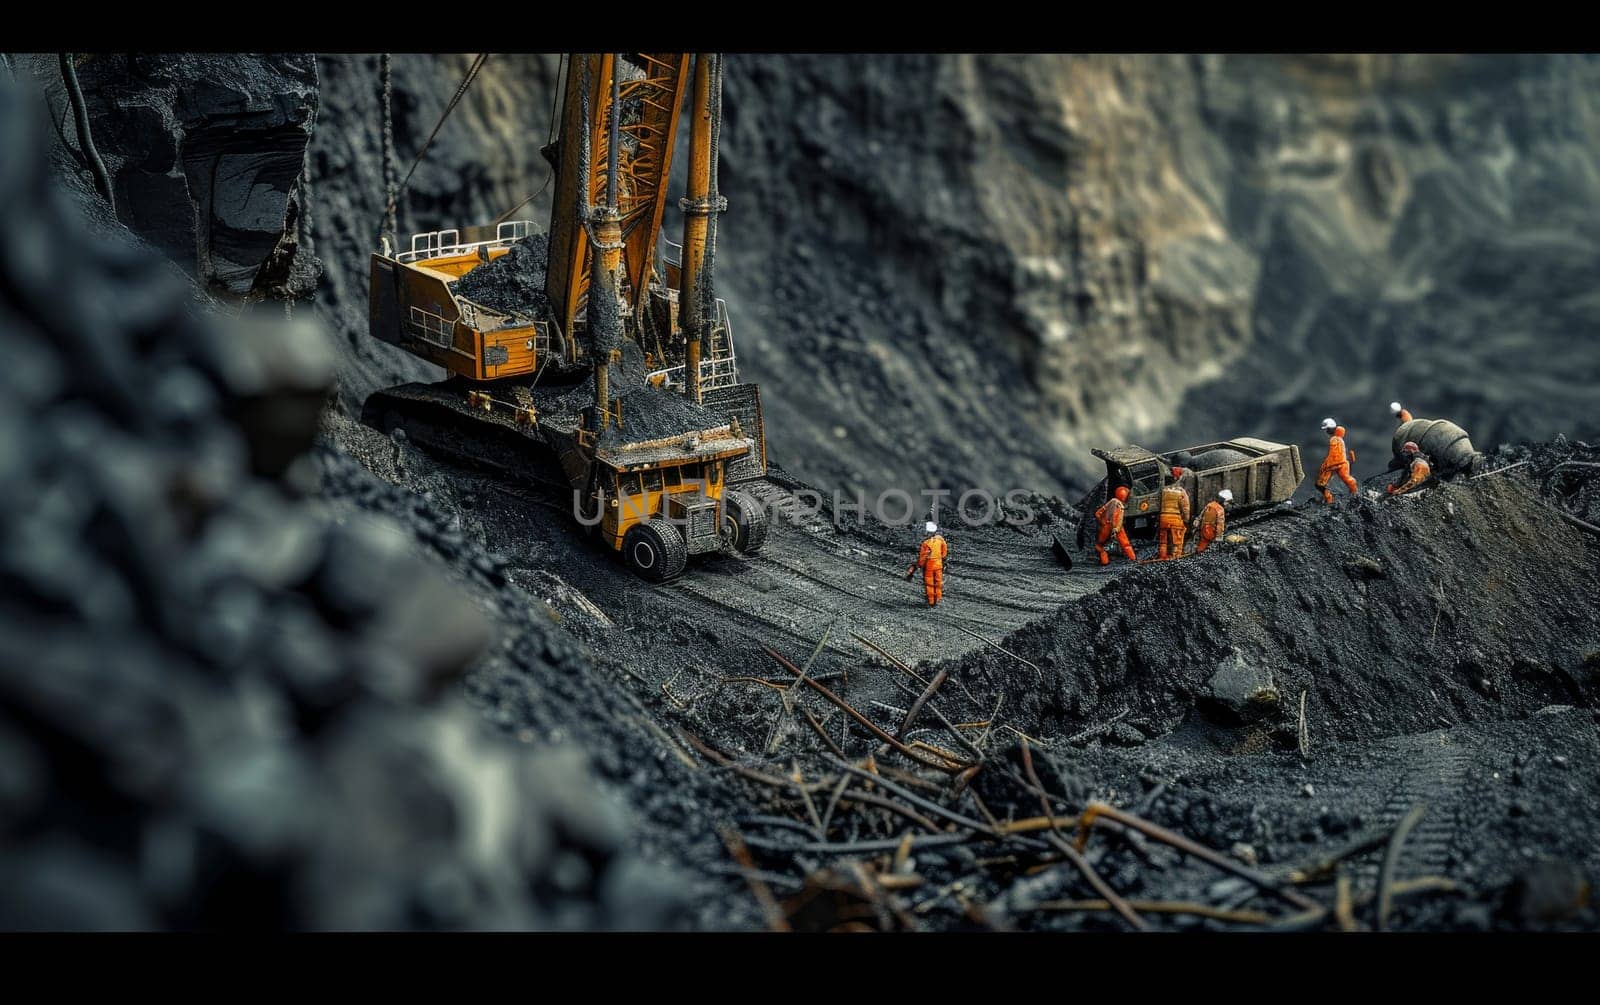 Workers in orange uniforms and heavy machinery at a dark, rocky mining site